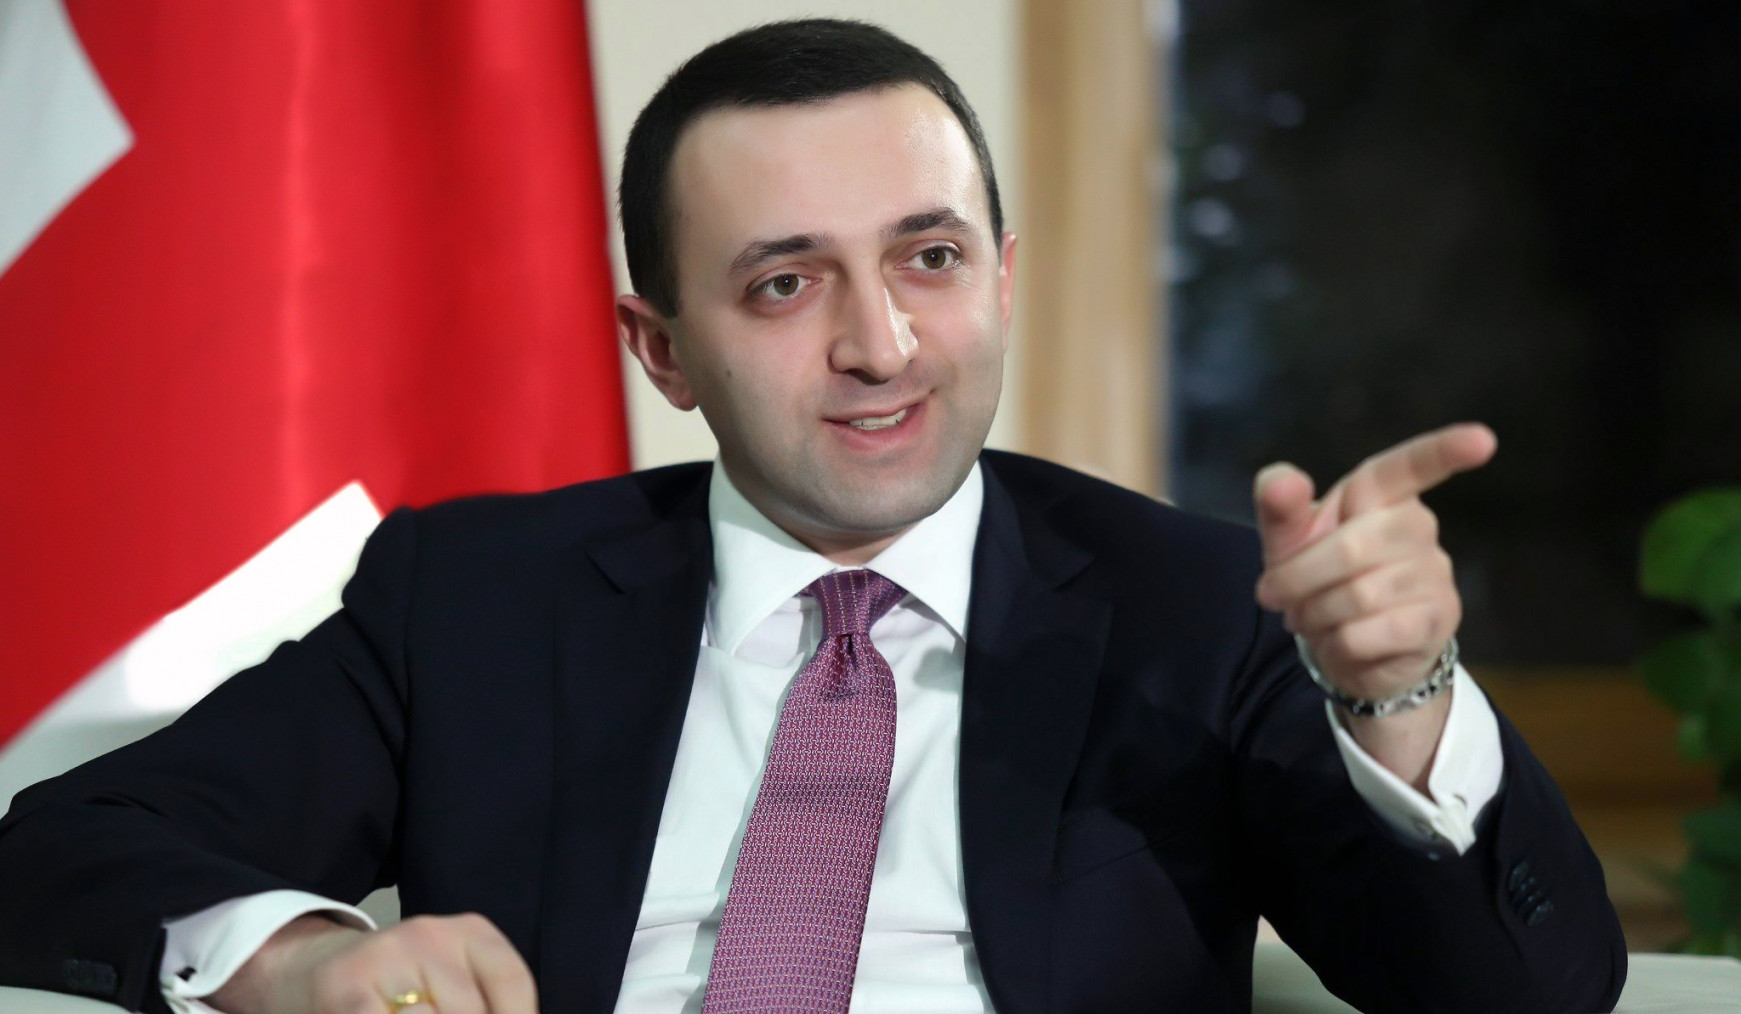 Georgian Prime Minister reminded that in 2008 no sanctions were imposed against Russia